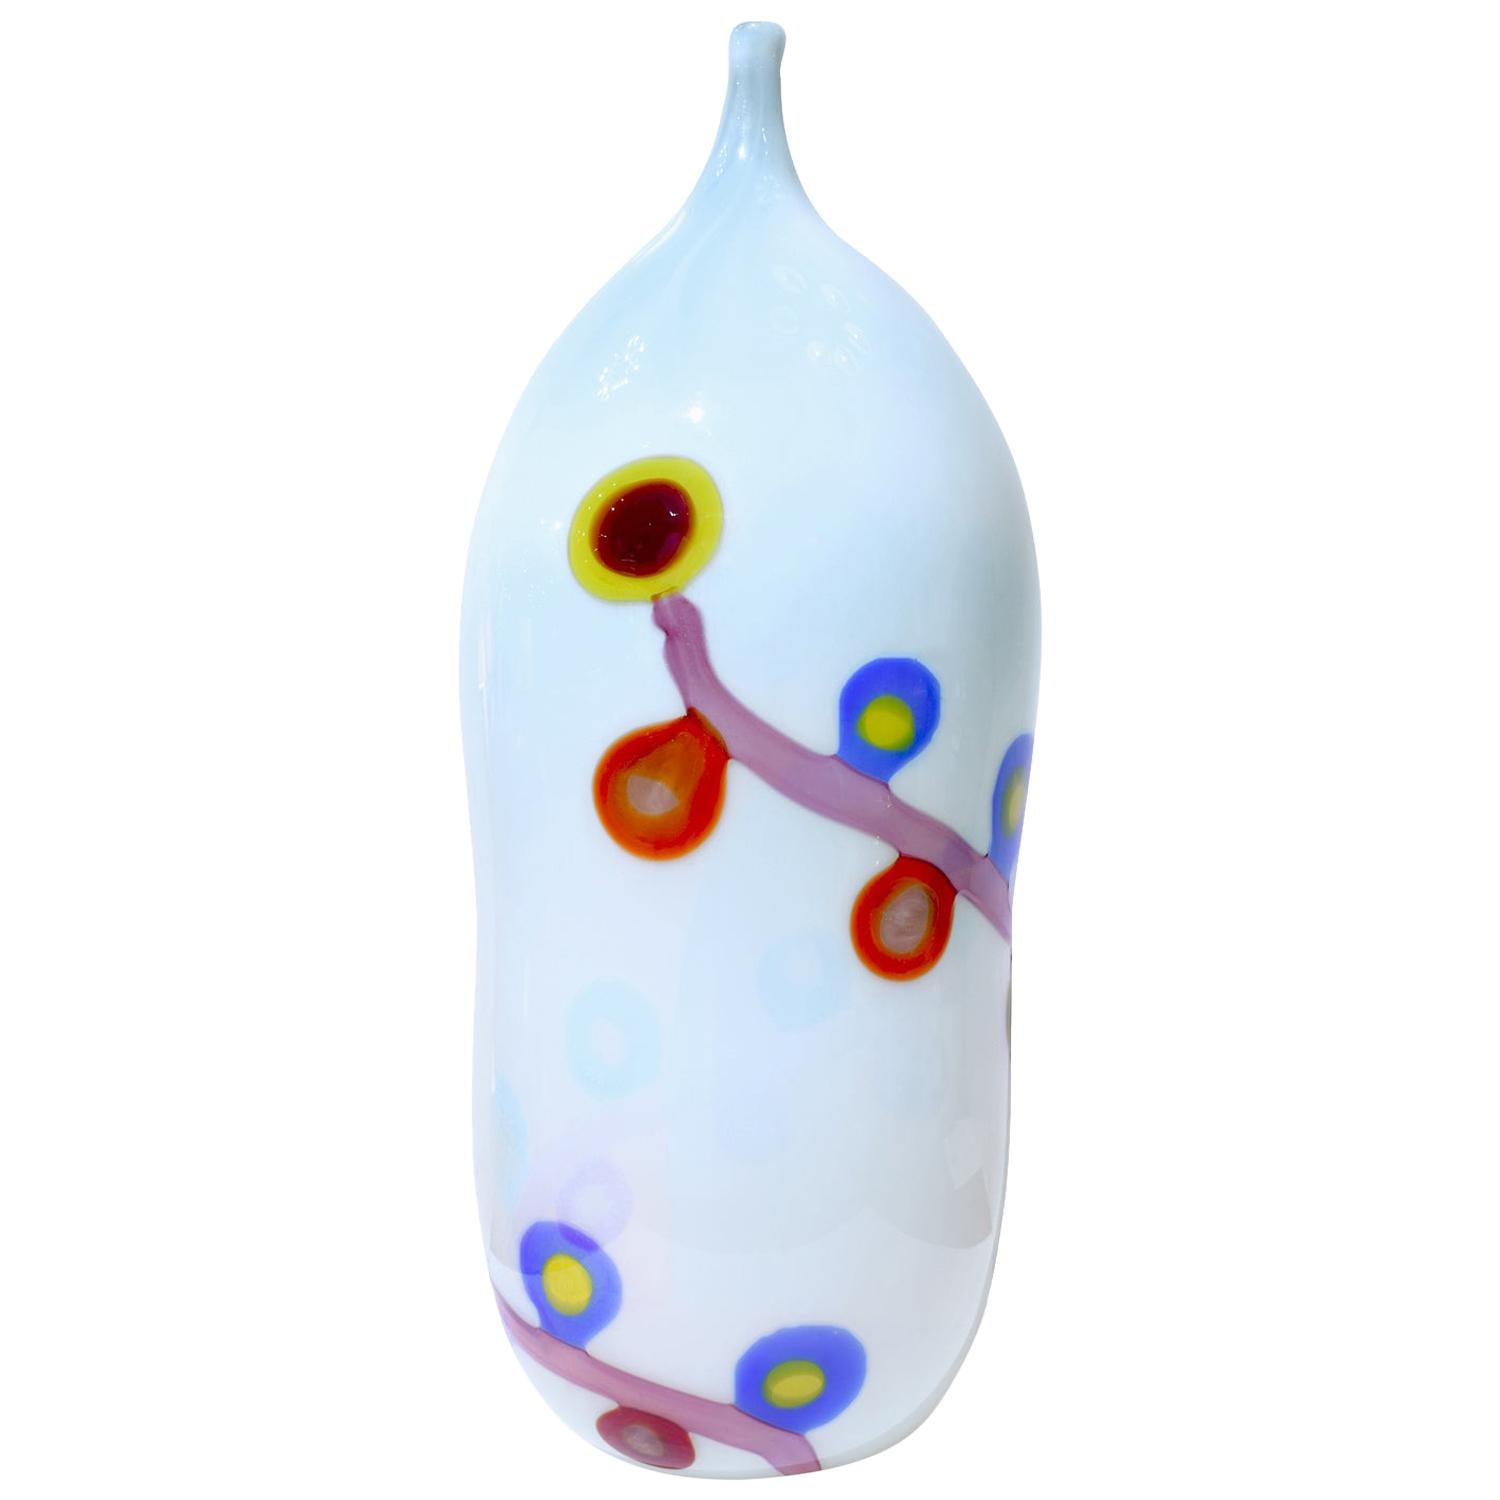 Anzolo Fuga Large Hand Blown Glass Bottle with Colorful Murrhines, 1959-1960